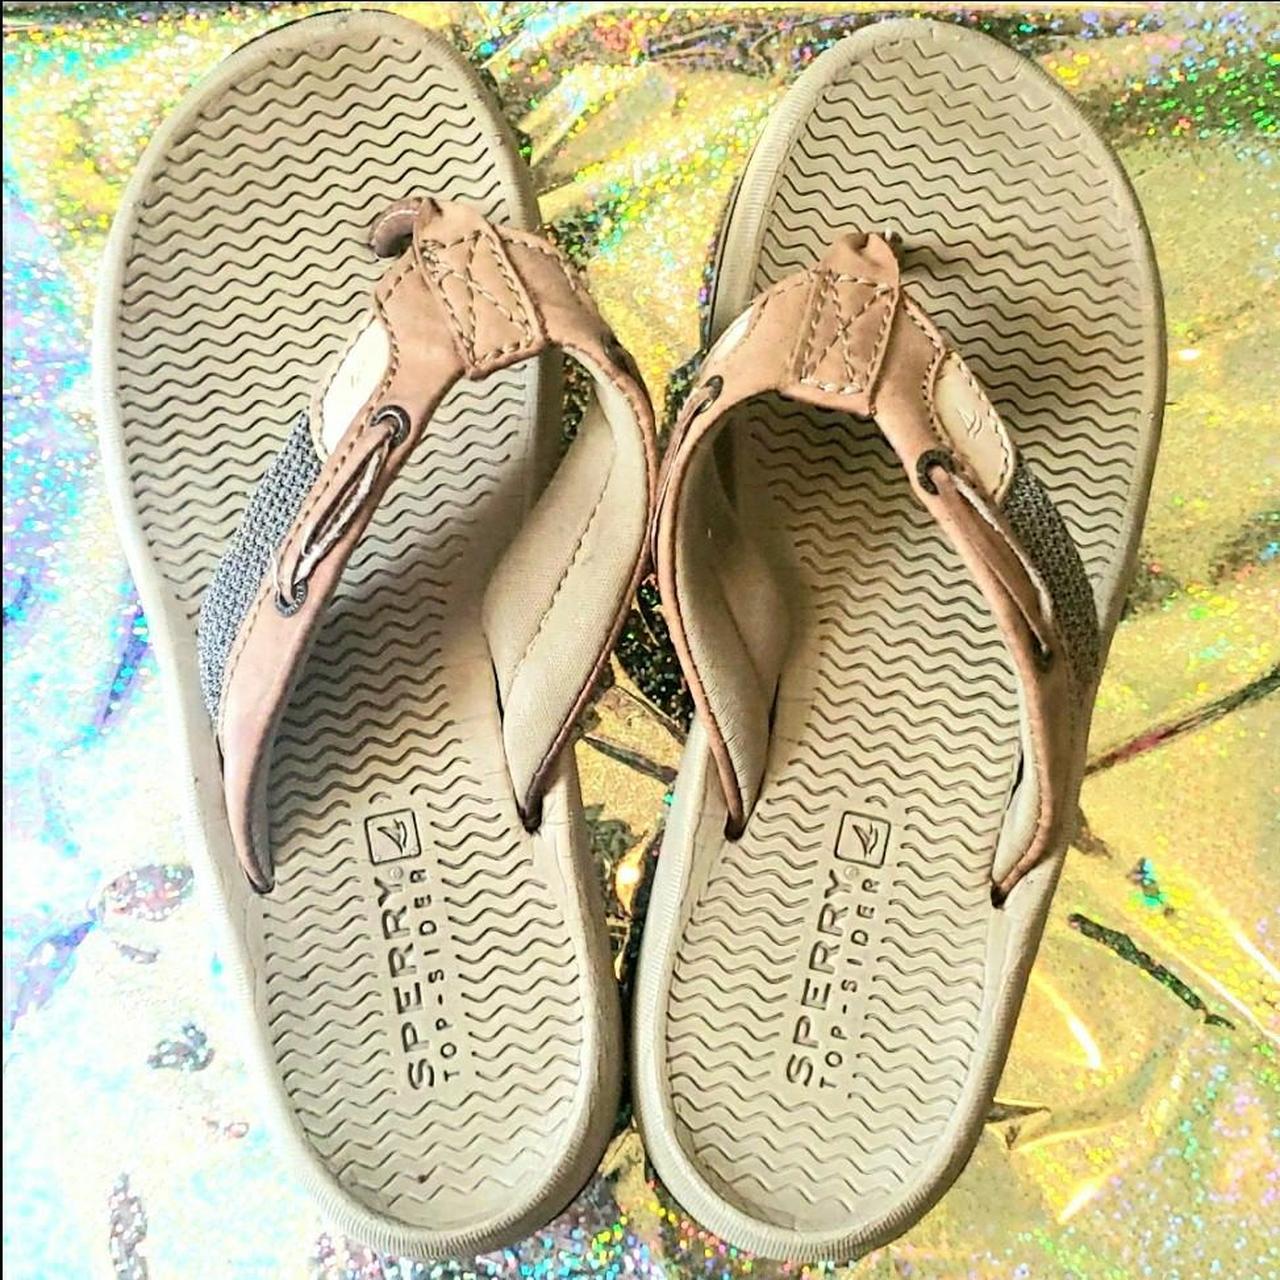 Sperry Women's Tan and Brown Sandals